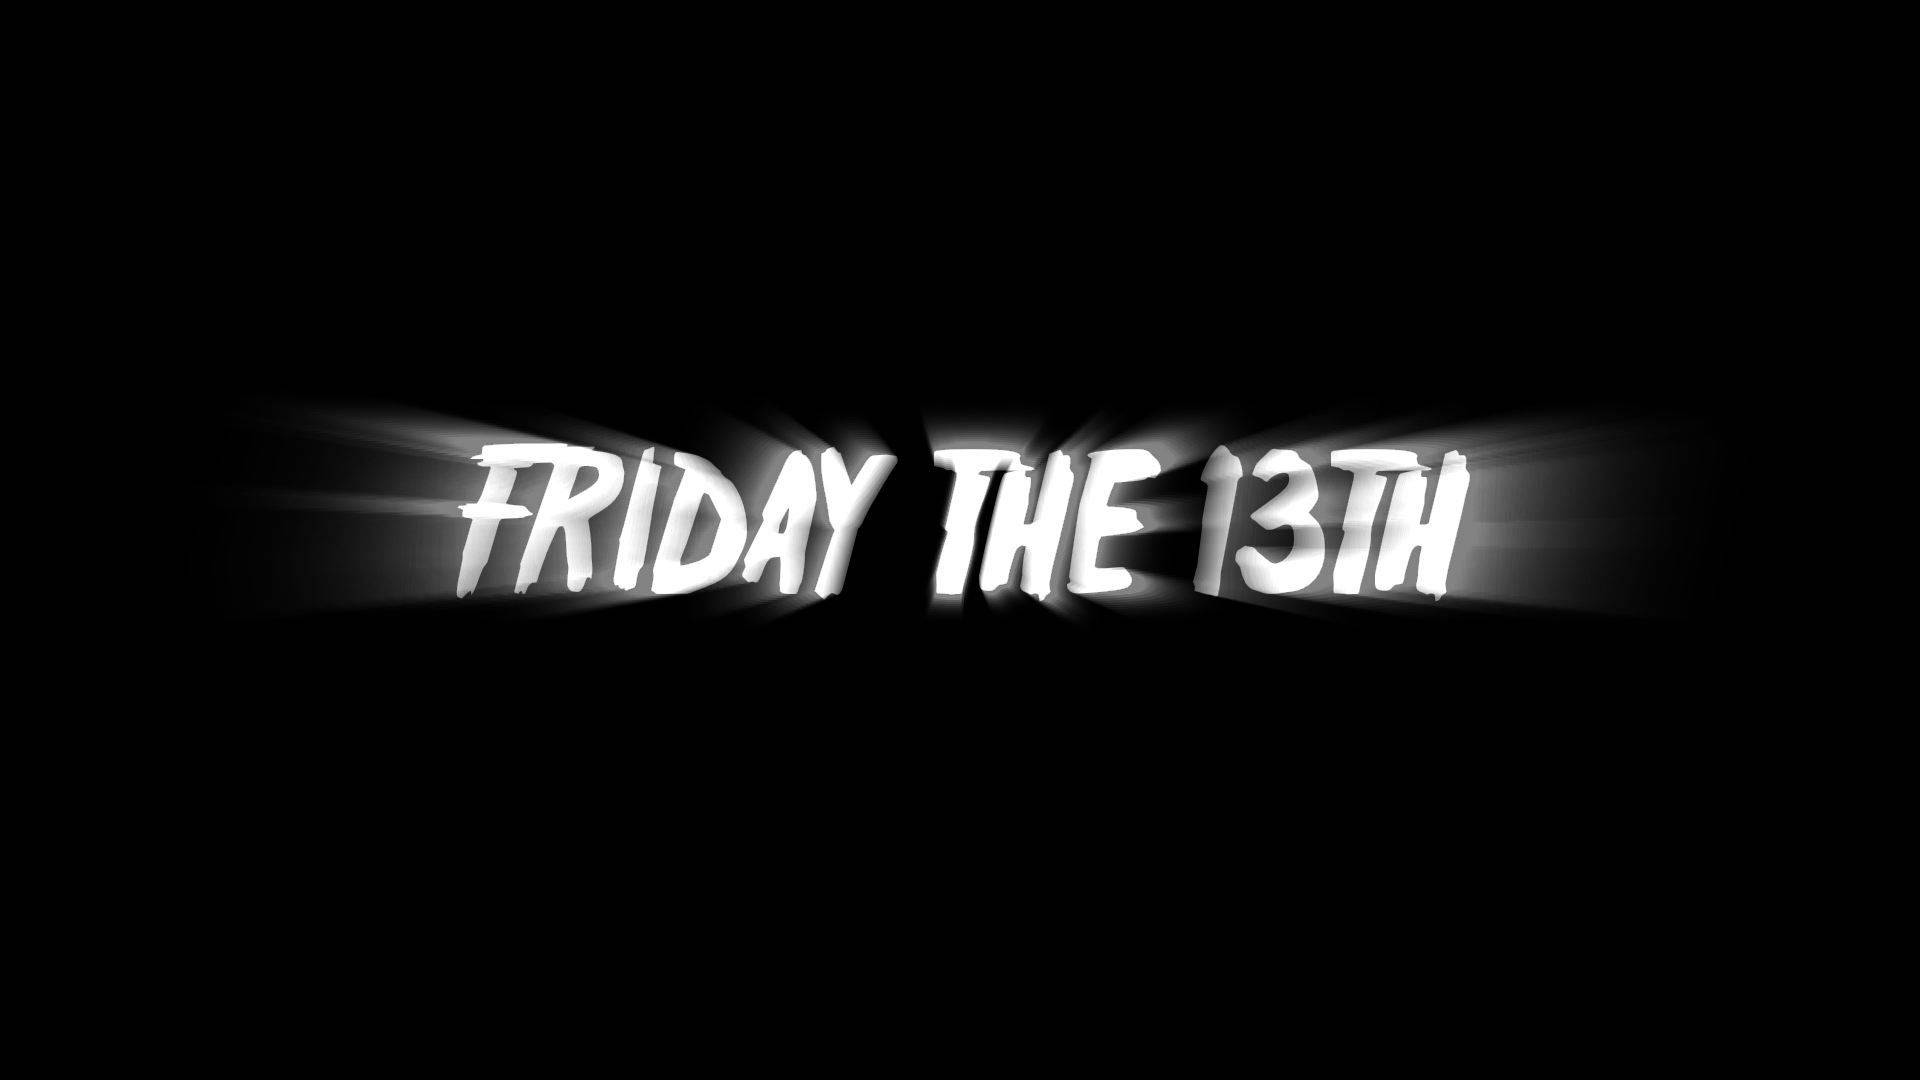 Friday The 13th Glowing Text Background